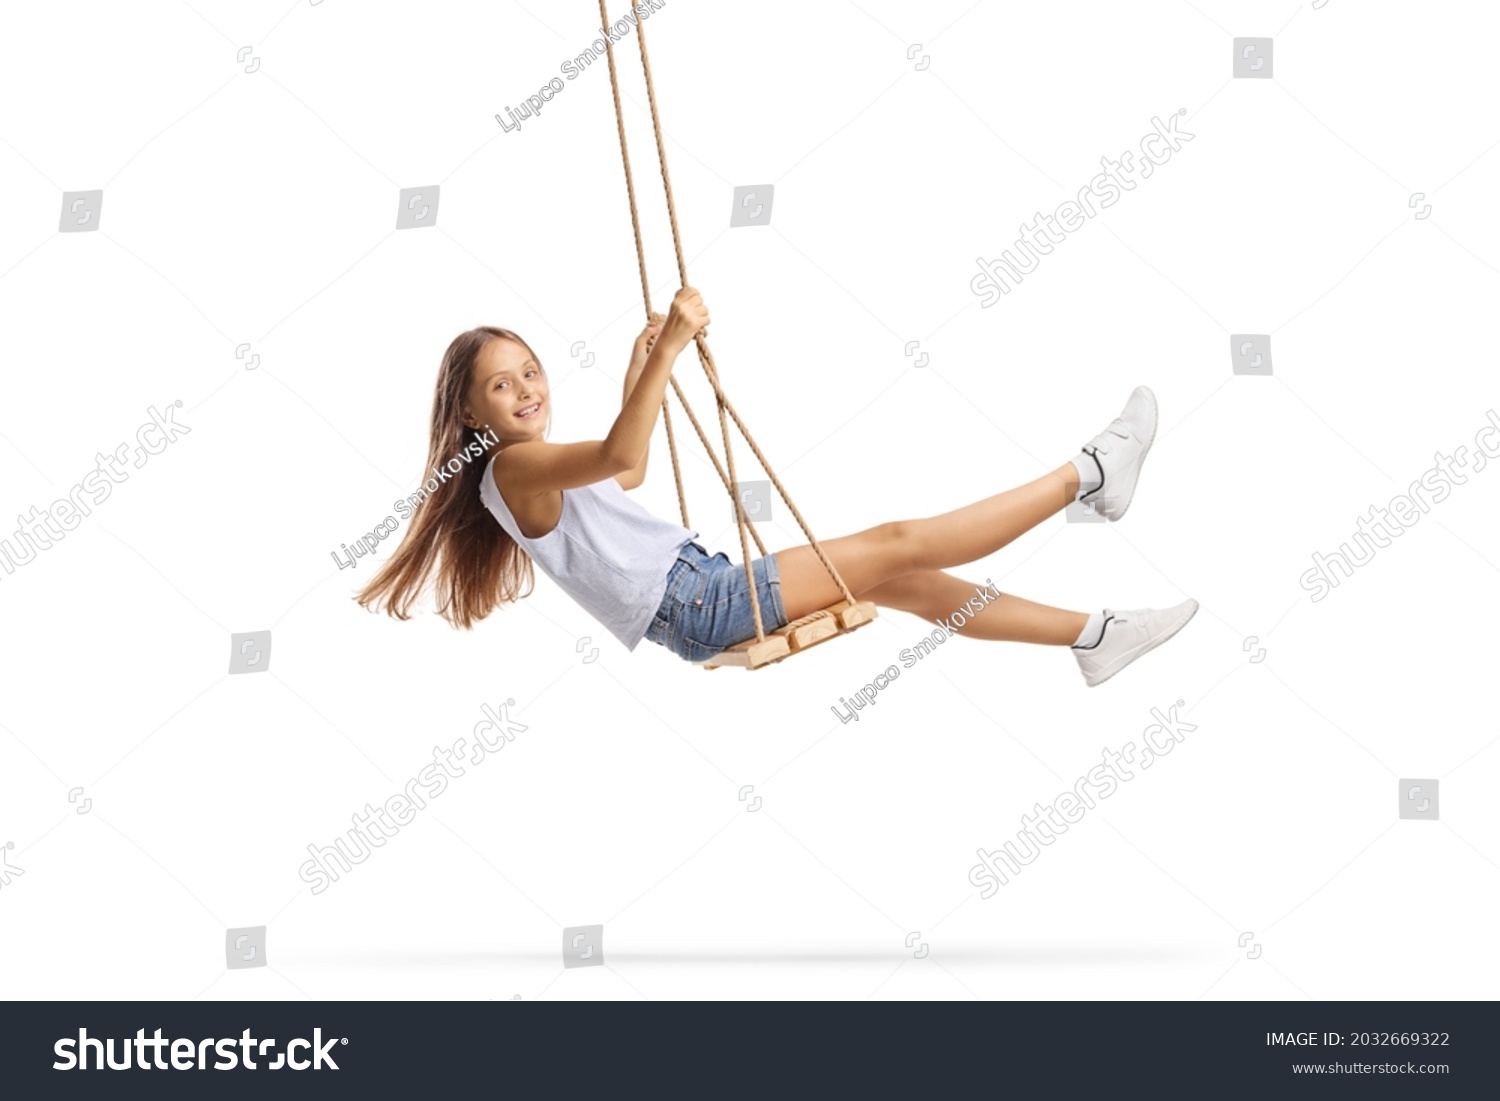 Beautiful girl with long hair swinging on a wooden swing isolated on white background #2032669322